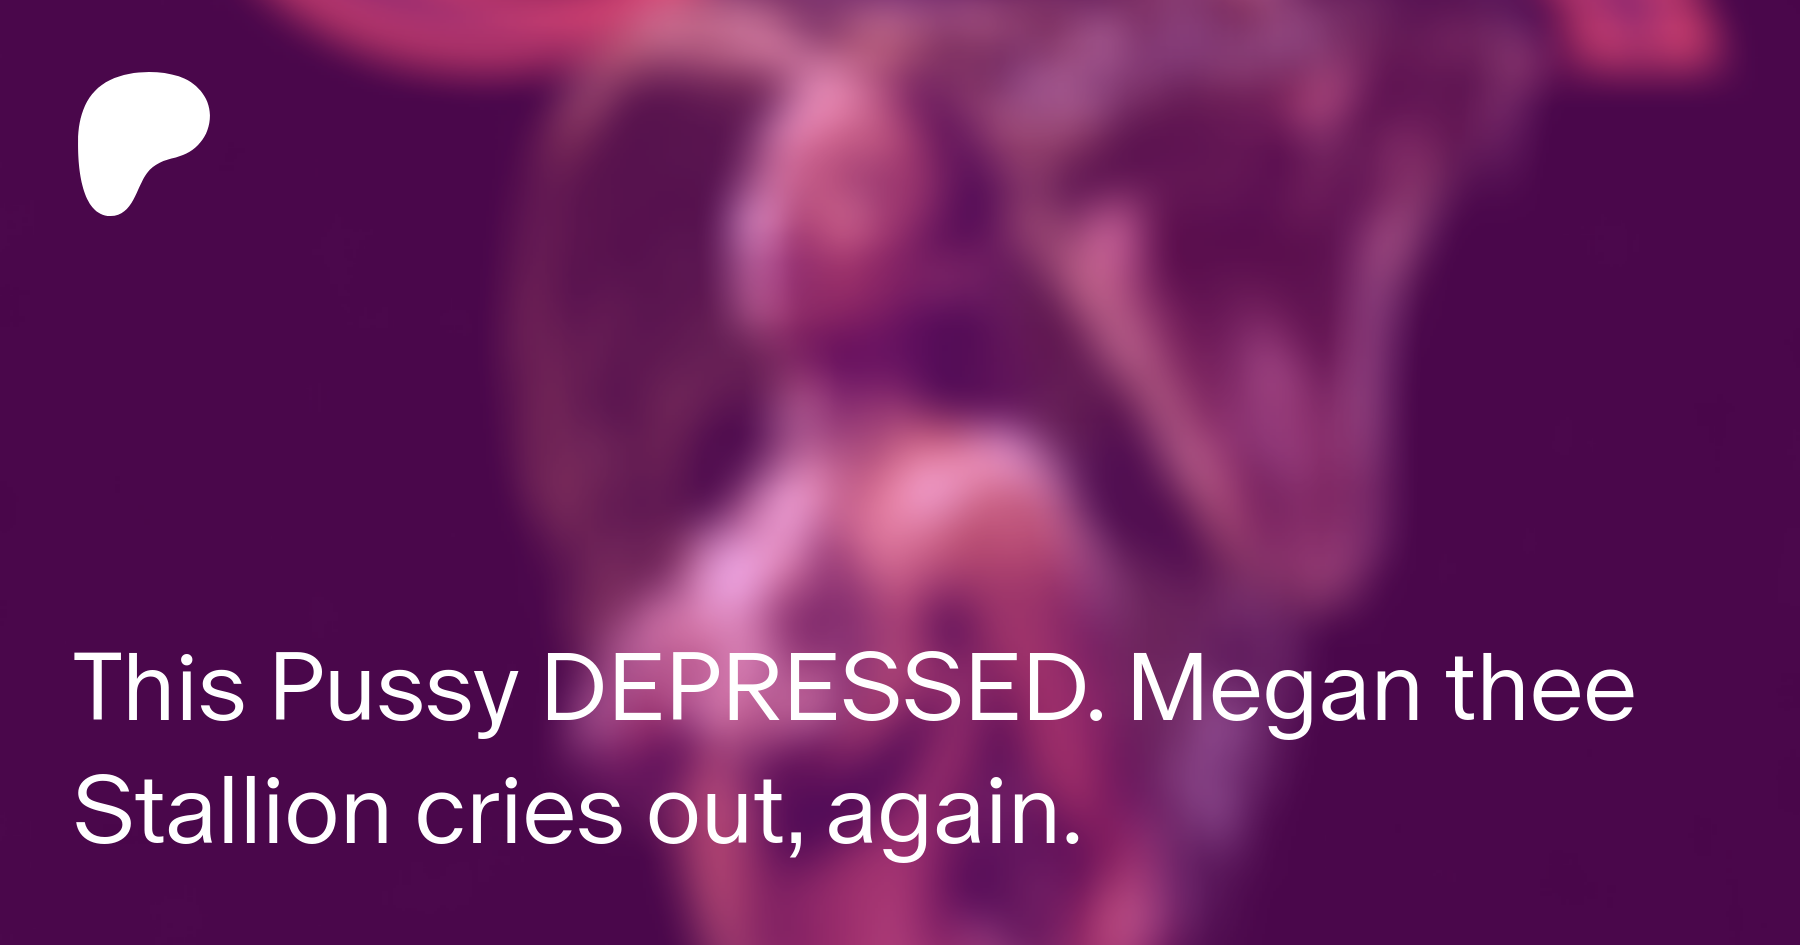 This Pussy DEPRESSED. Megan thee Stallion cries out, again. | Patreon